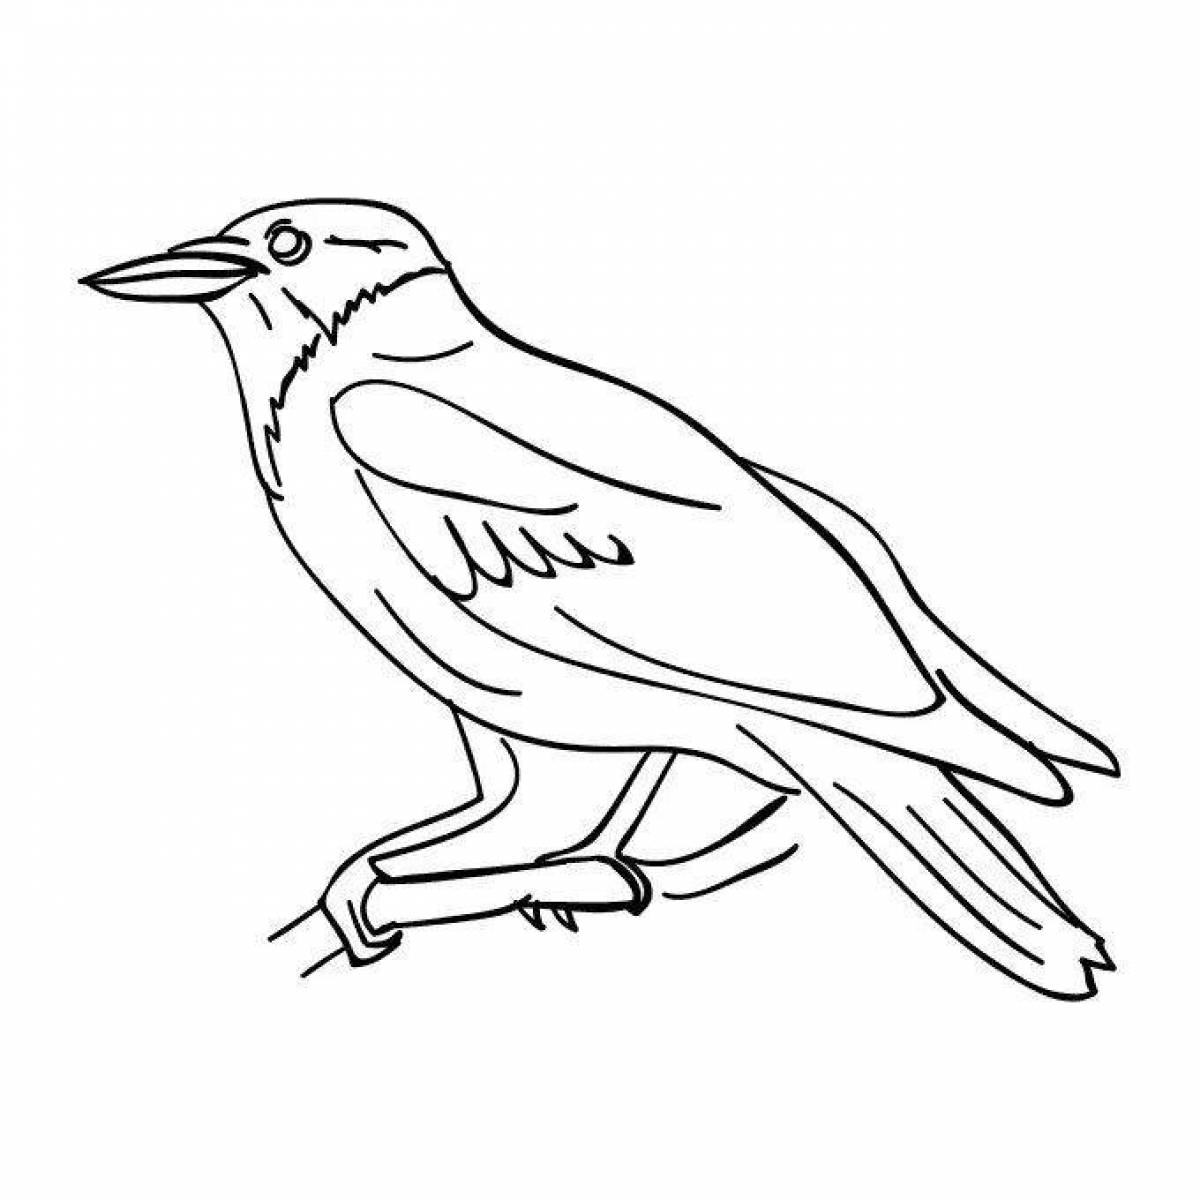 Sparrow and crow dynamic coloring page